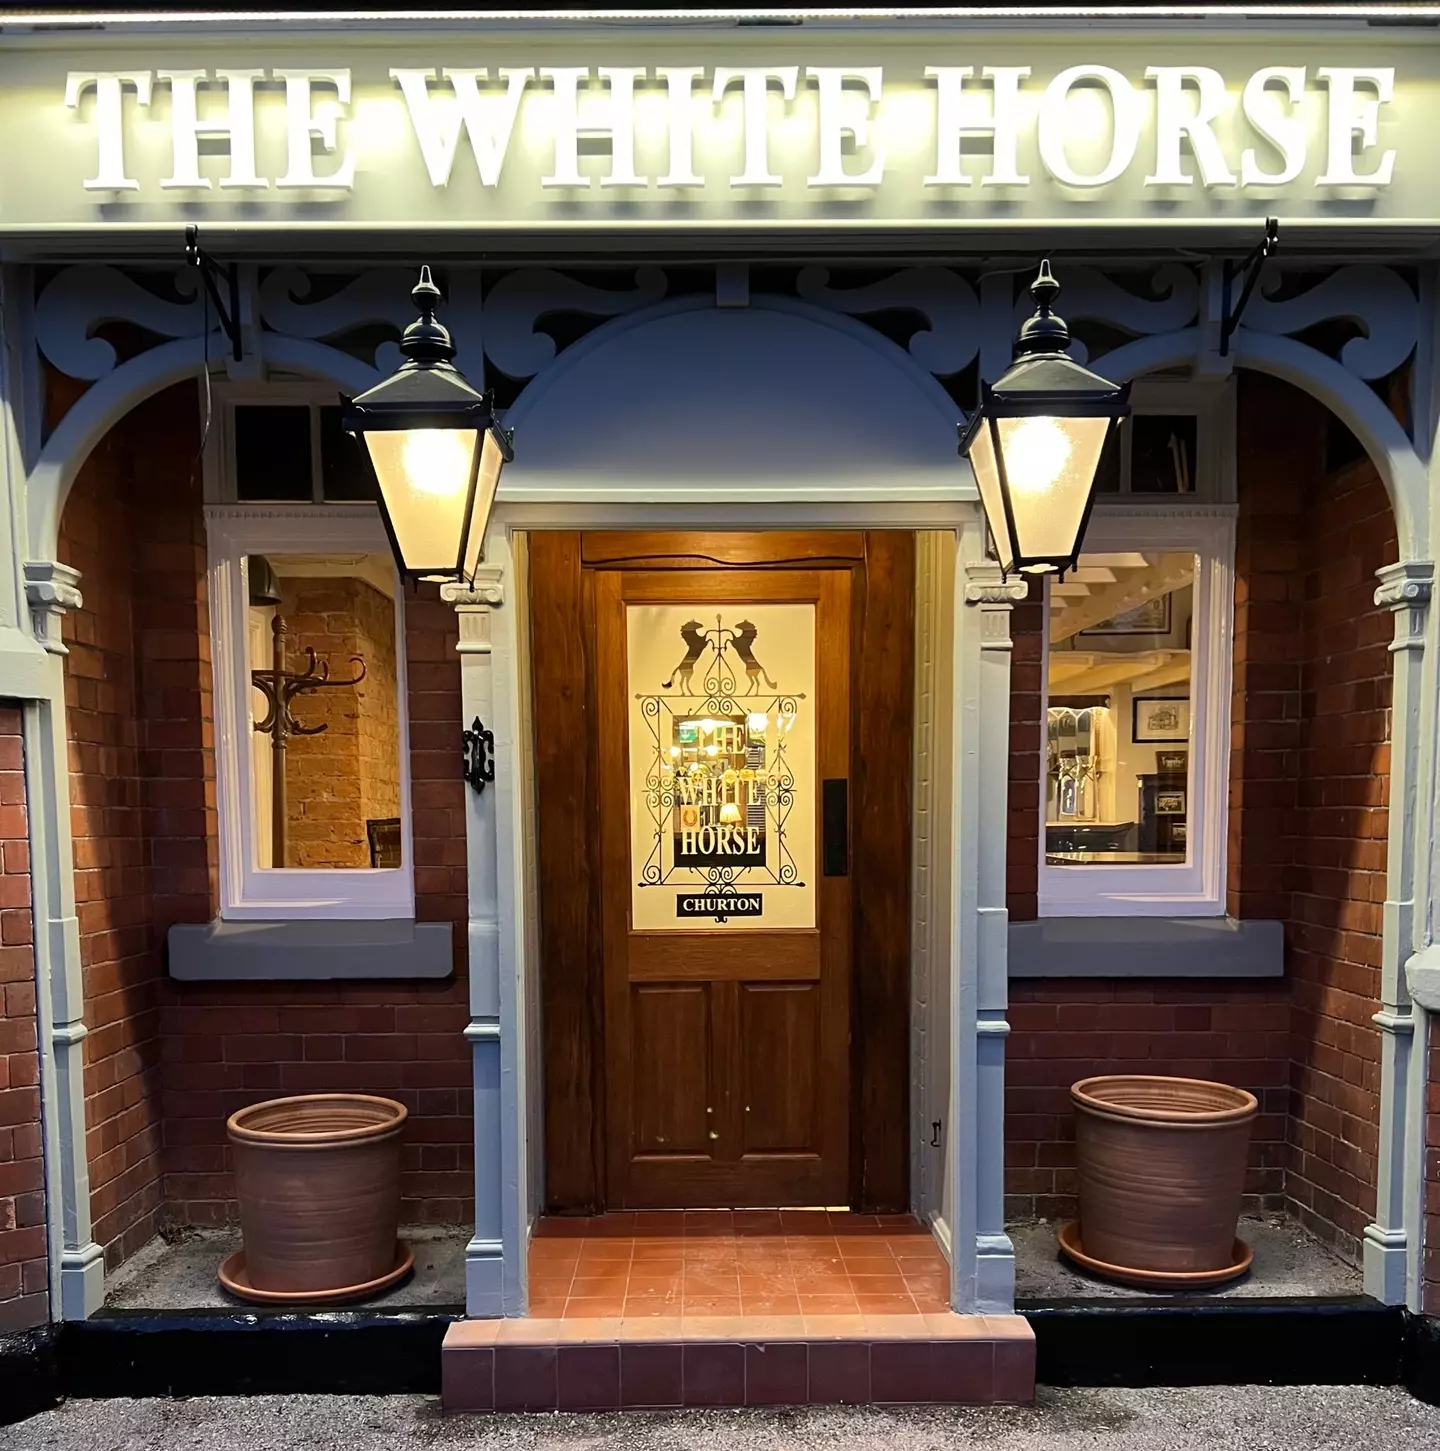 The White Horse Pub faced some backlash for their burger prices, but also a lot of interest in trying it out.